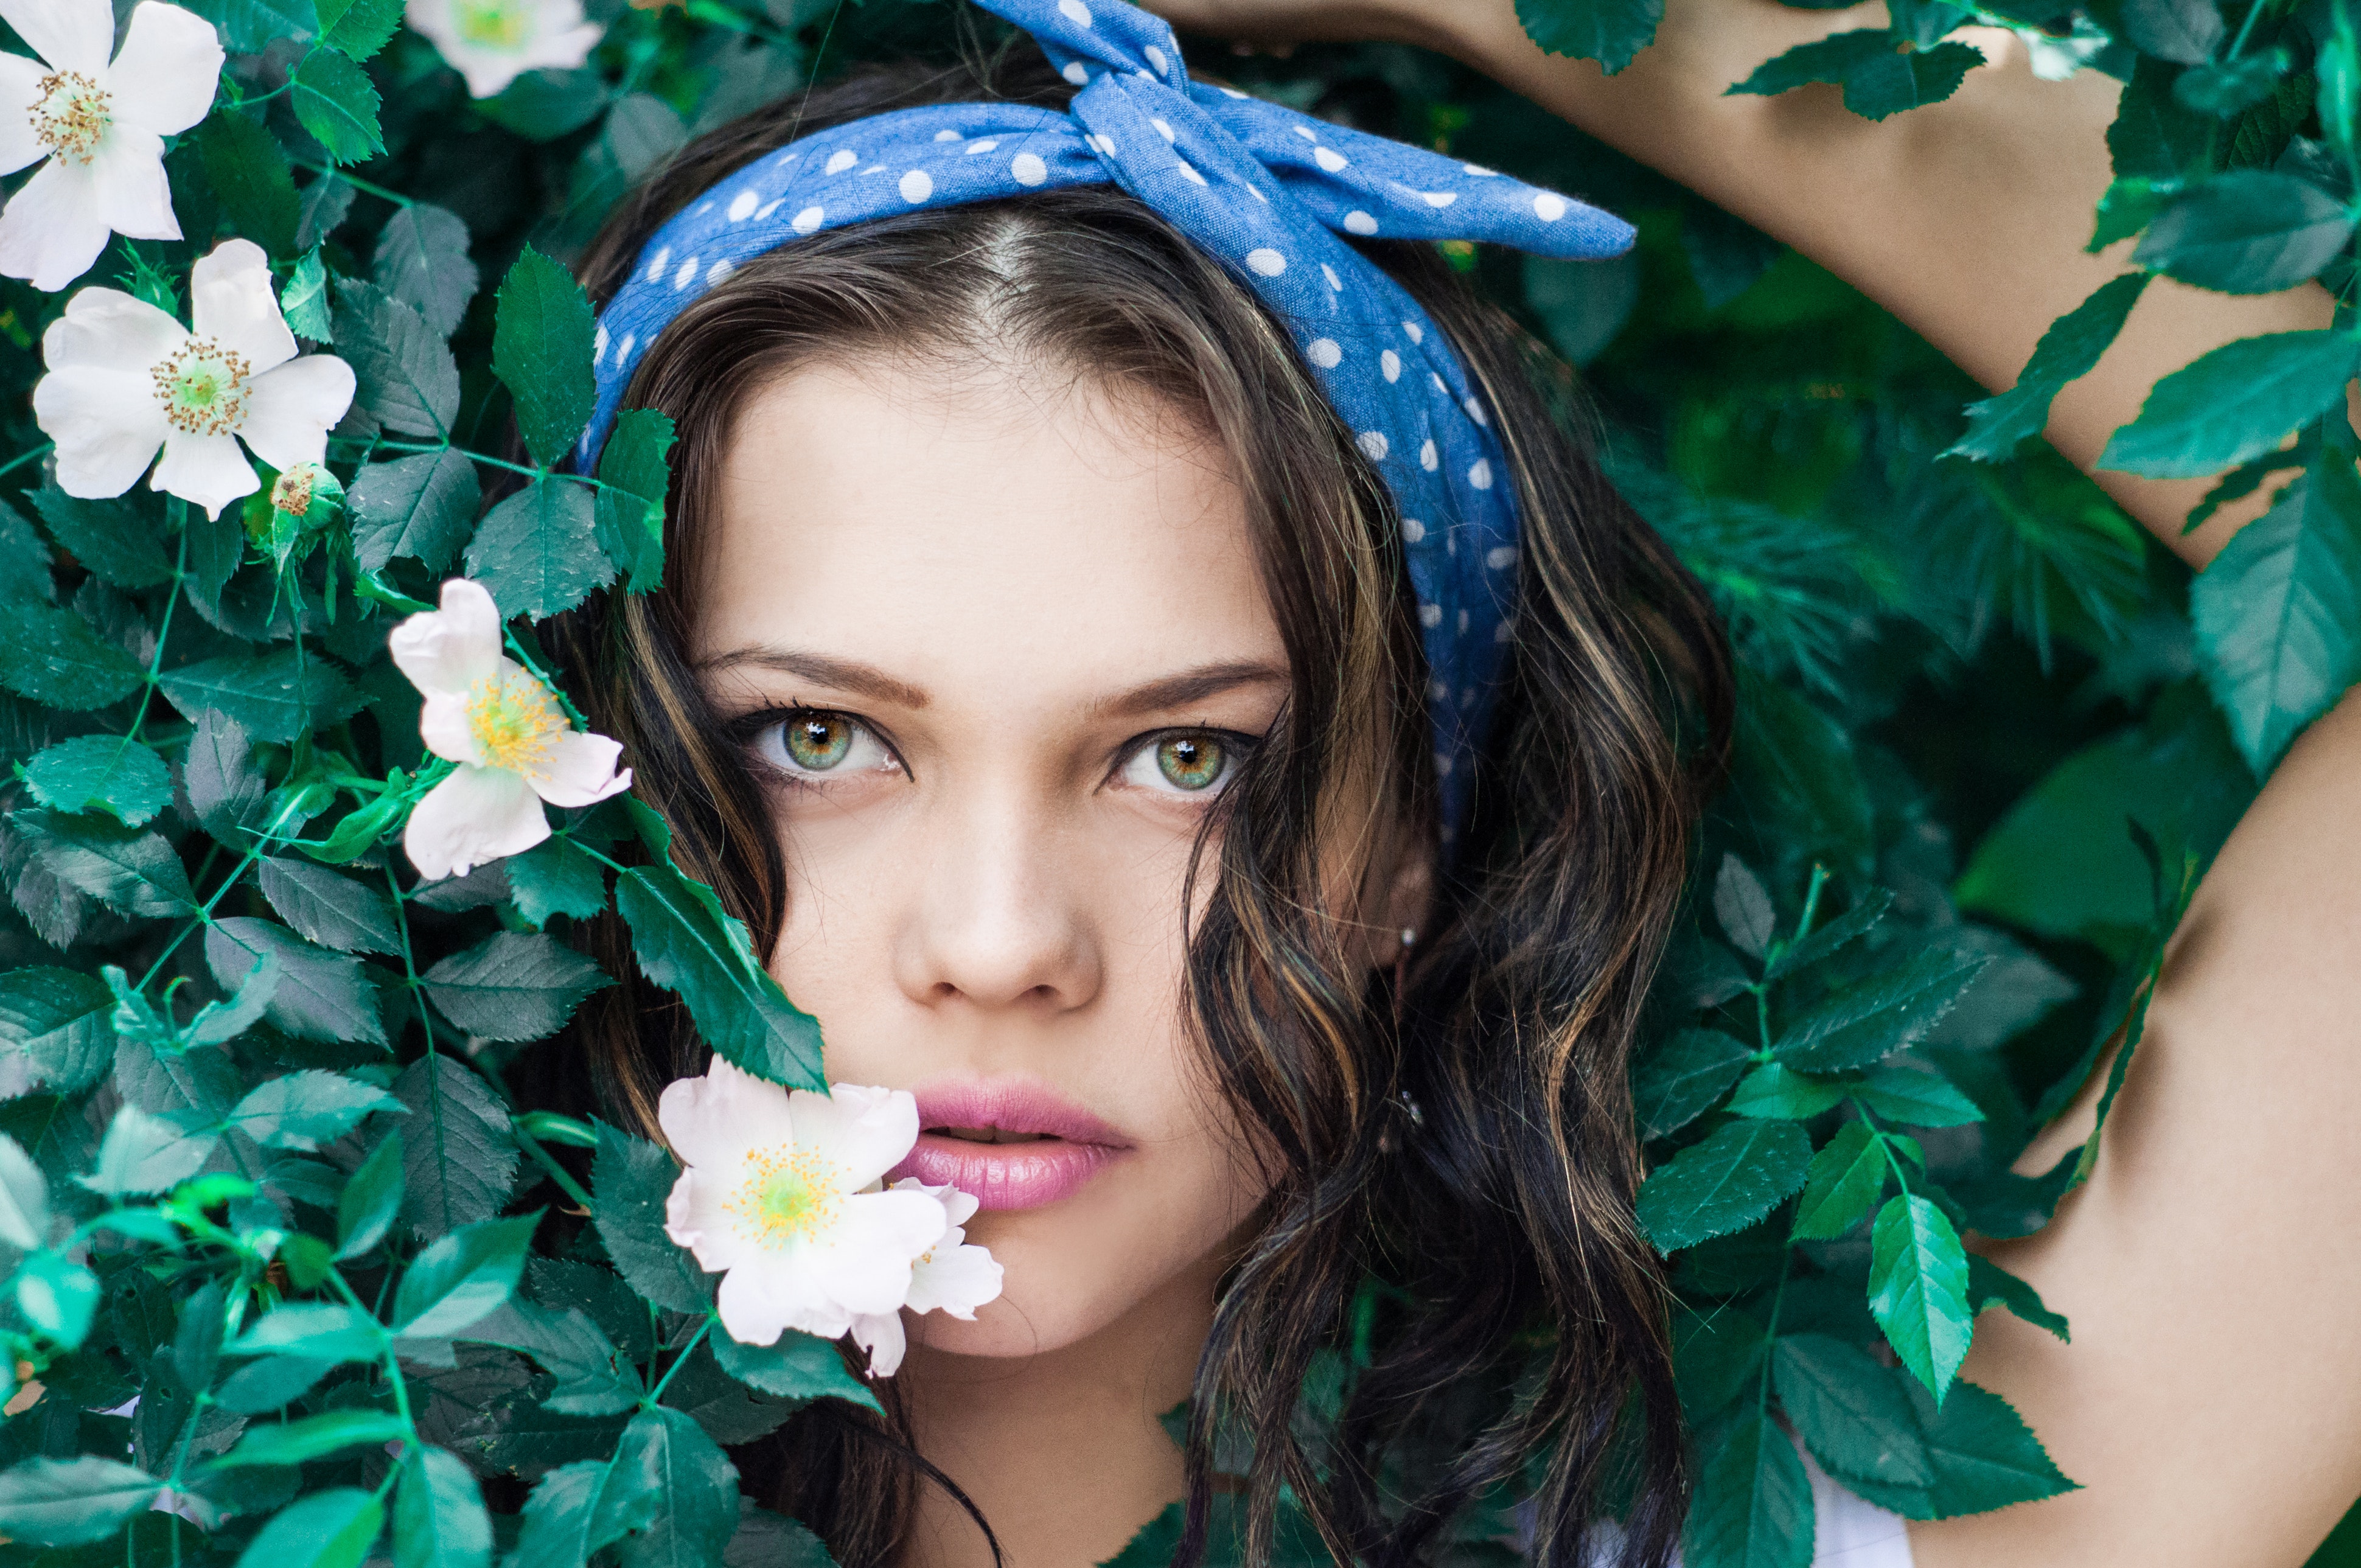 Portrait photo of woman in white top and blue polka dot headband near flowers